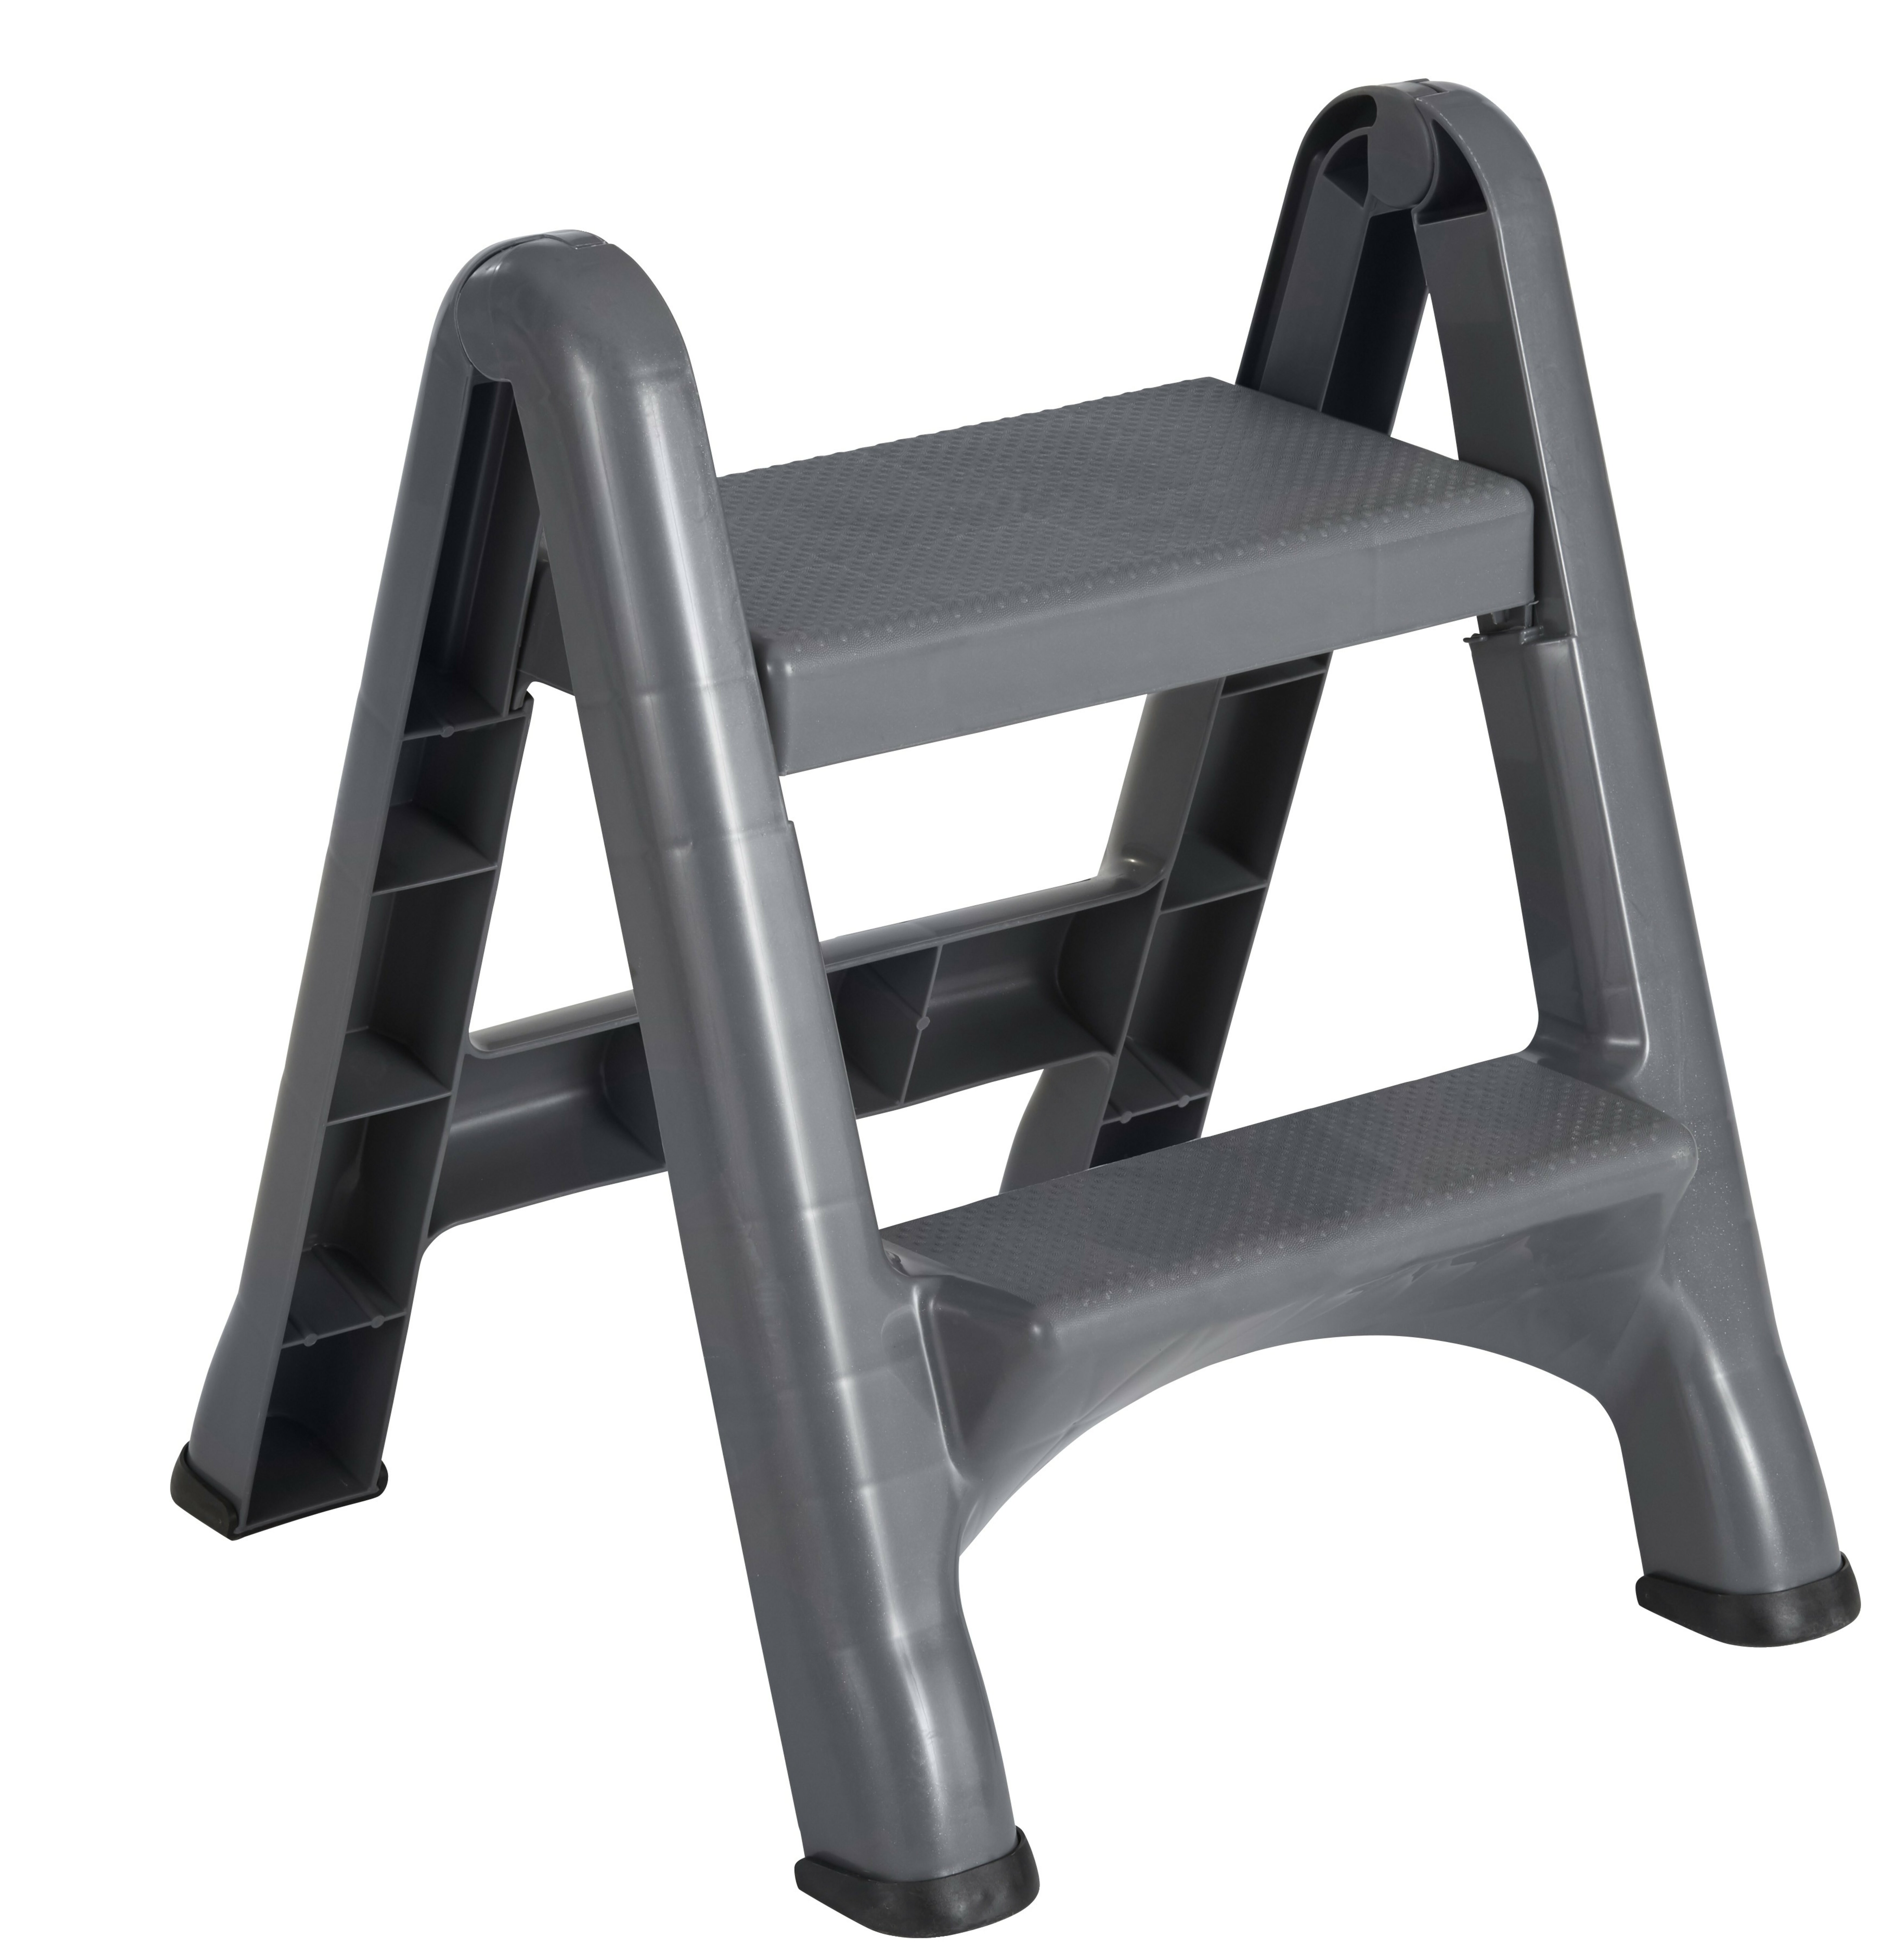 Multi Purpose Folding Step Stools Foldable Seat Ladders Easy Carry Storage Handy 